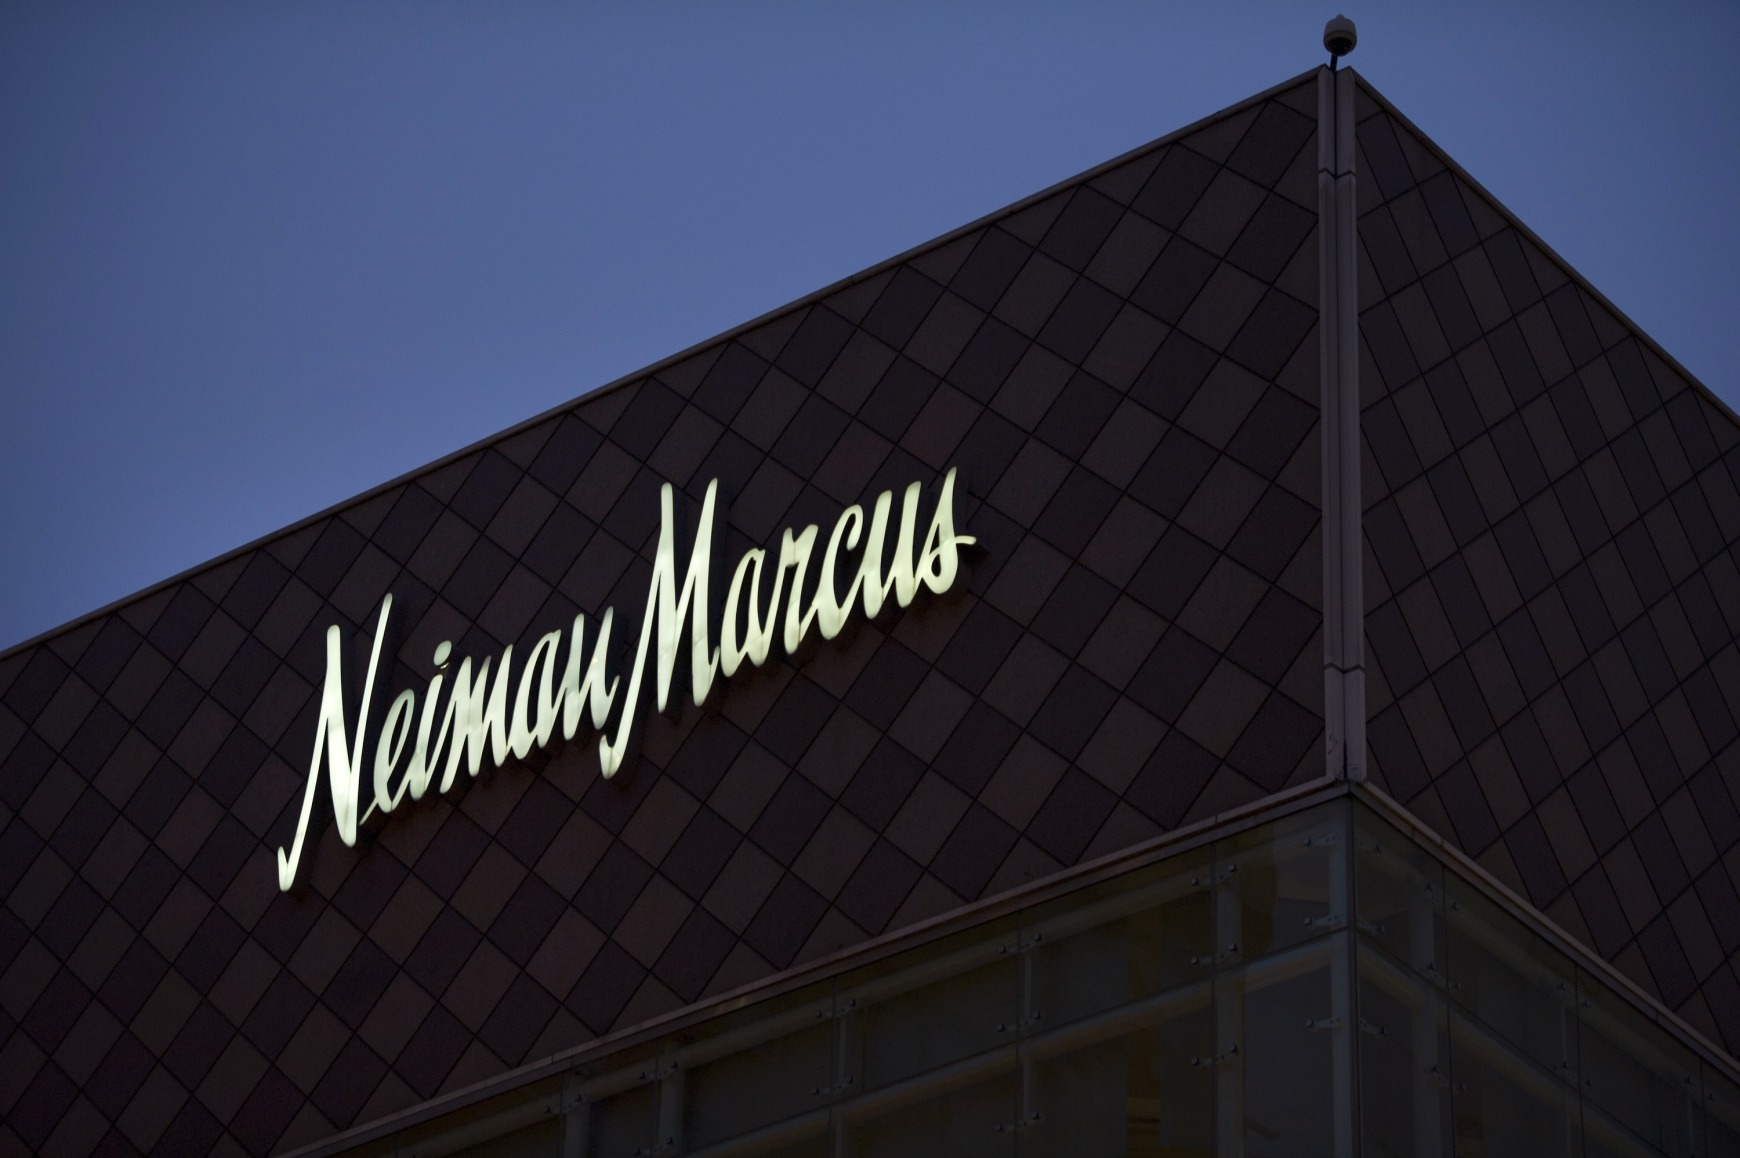 Neiman Marcus Make Some Noise Event